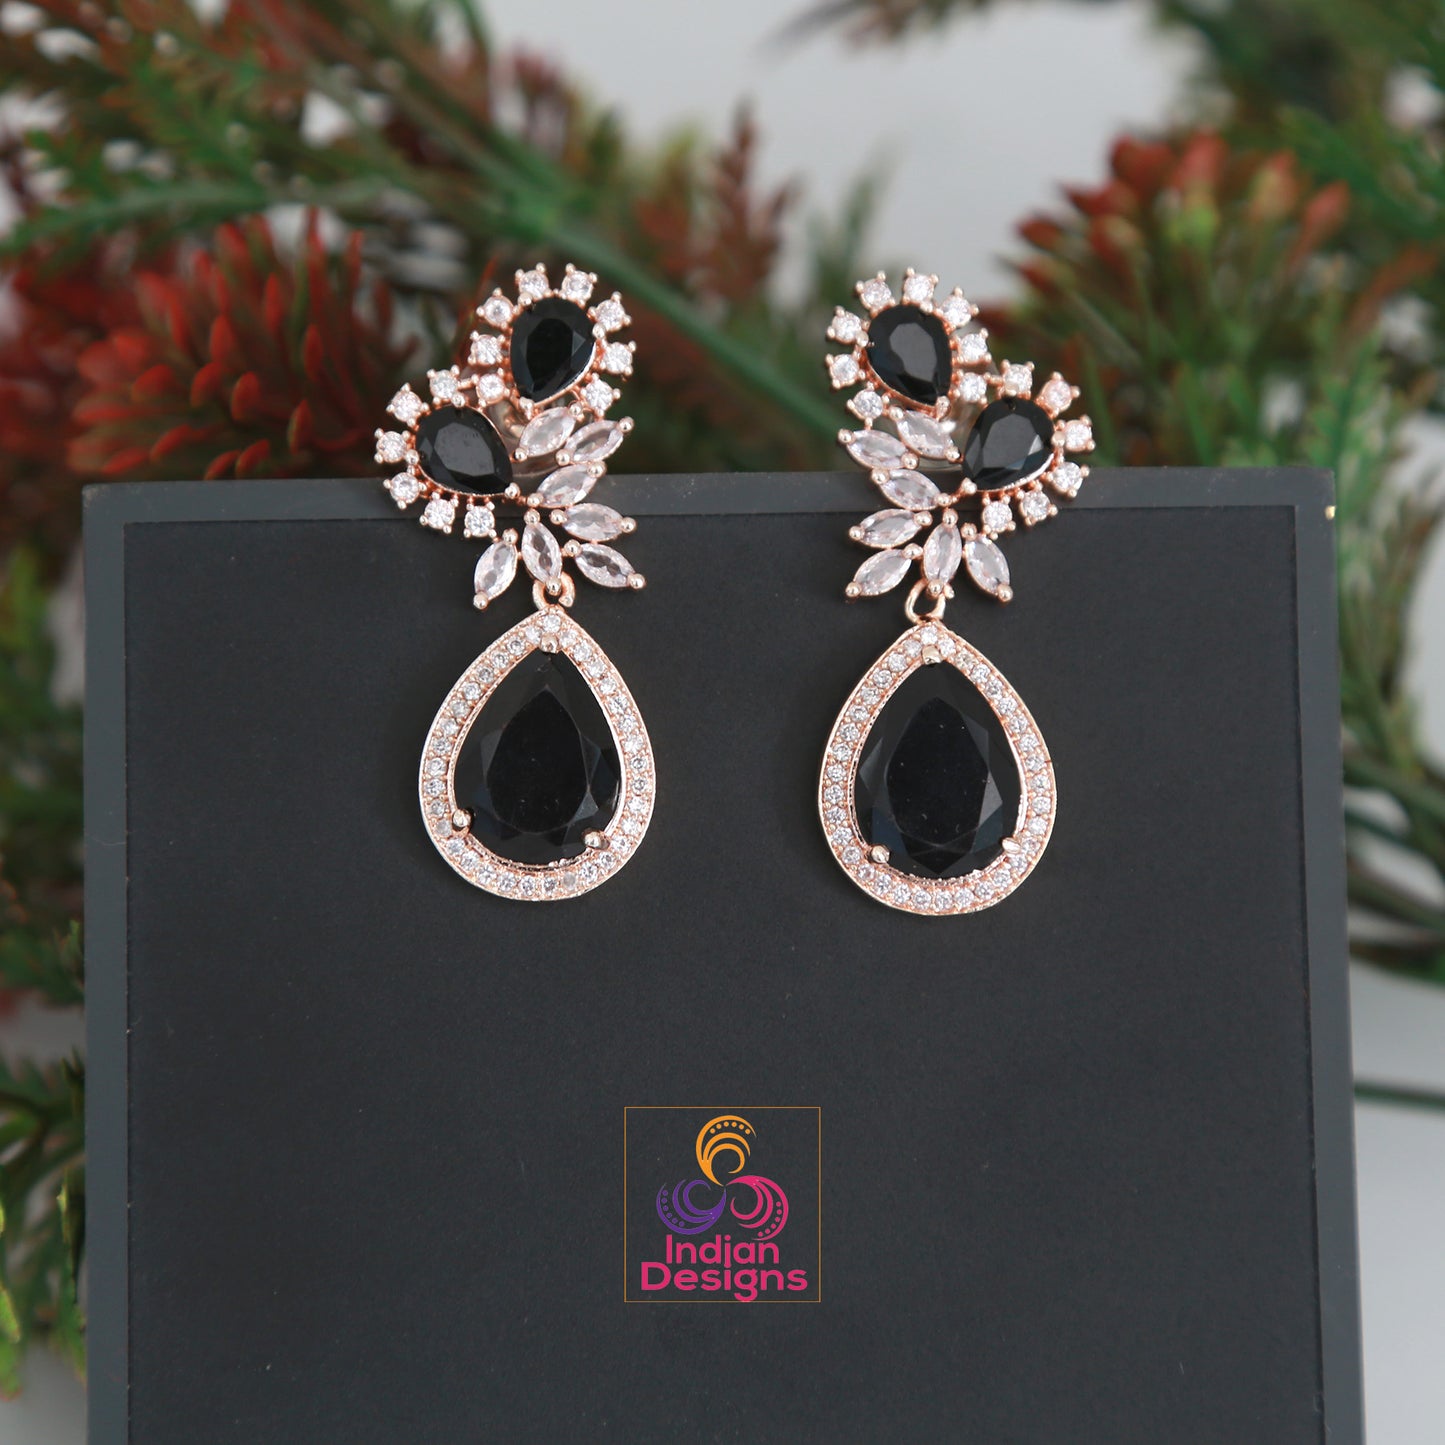 Rose Gold CZ American diamond Designer Earrings floral design with Large Pear-shaped color stones